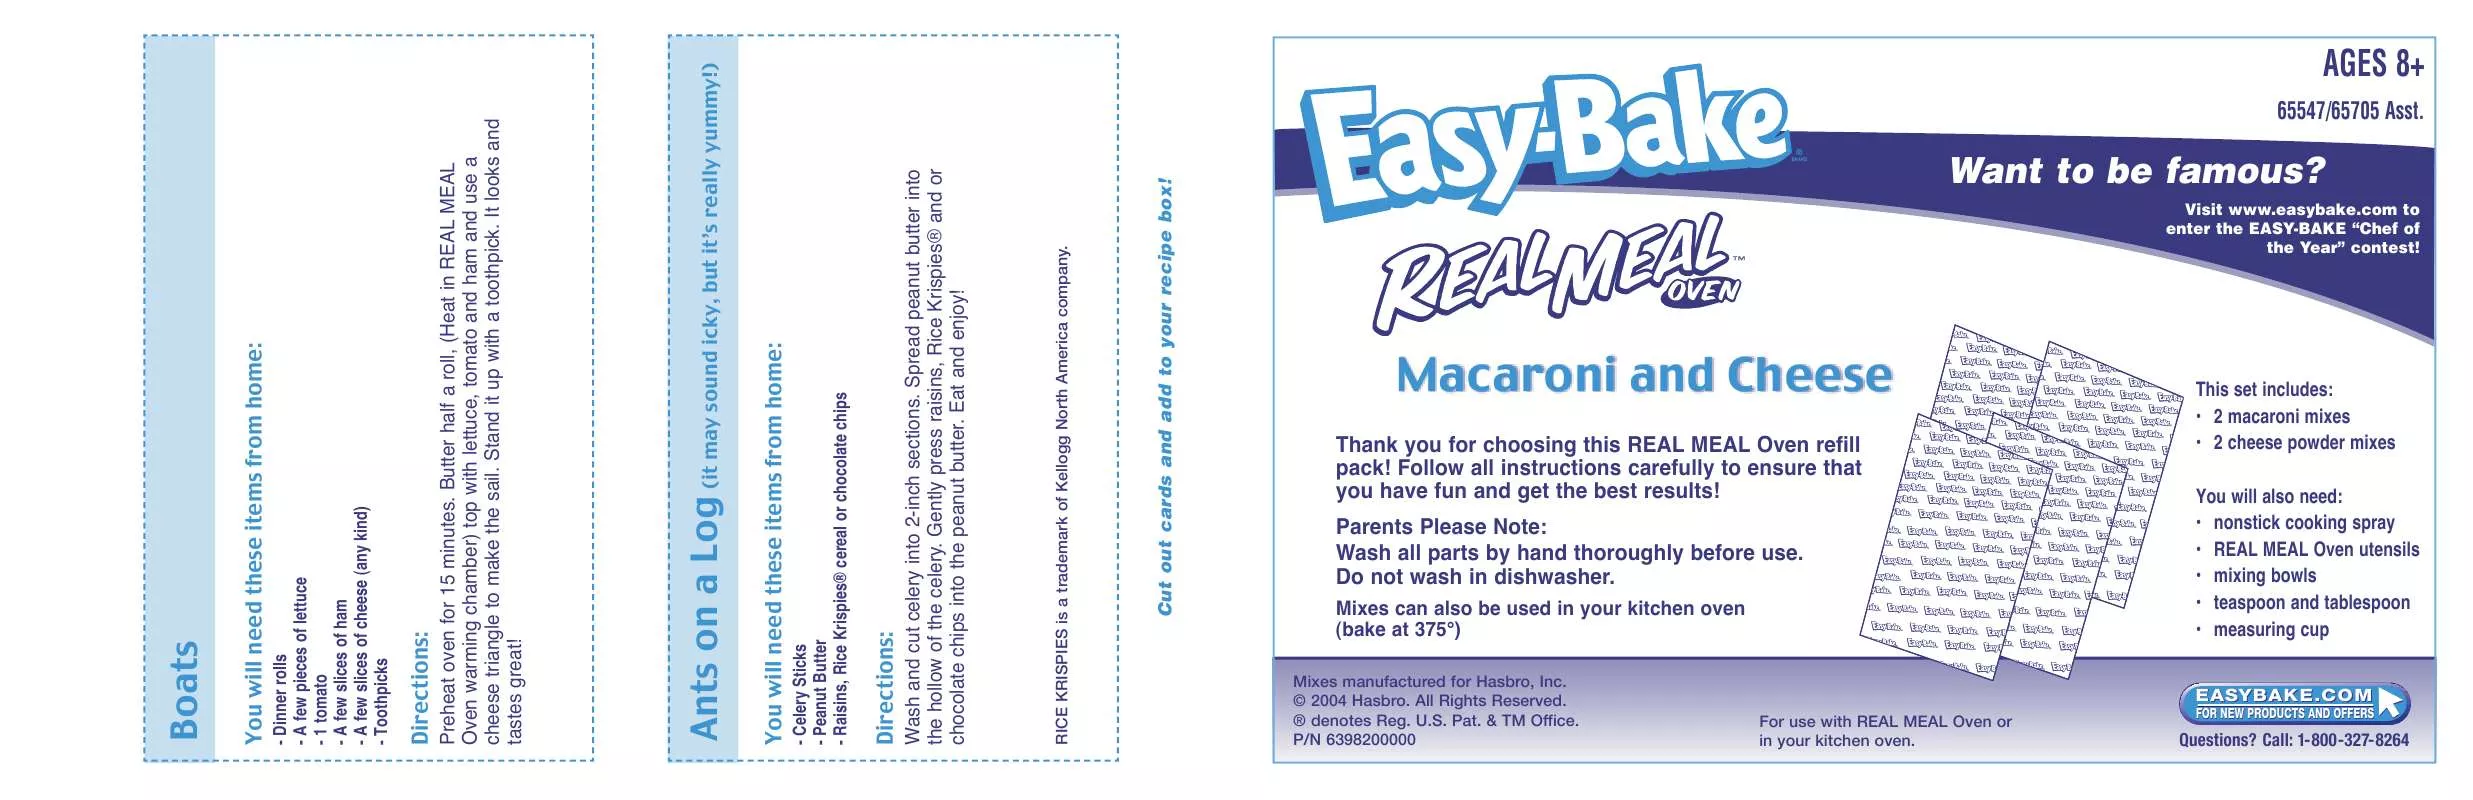 Mode d'emploi HASBRO EASY BAKE REAL MEAL OVEN MACARONI AND CHEESE 2004